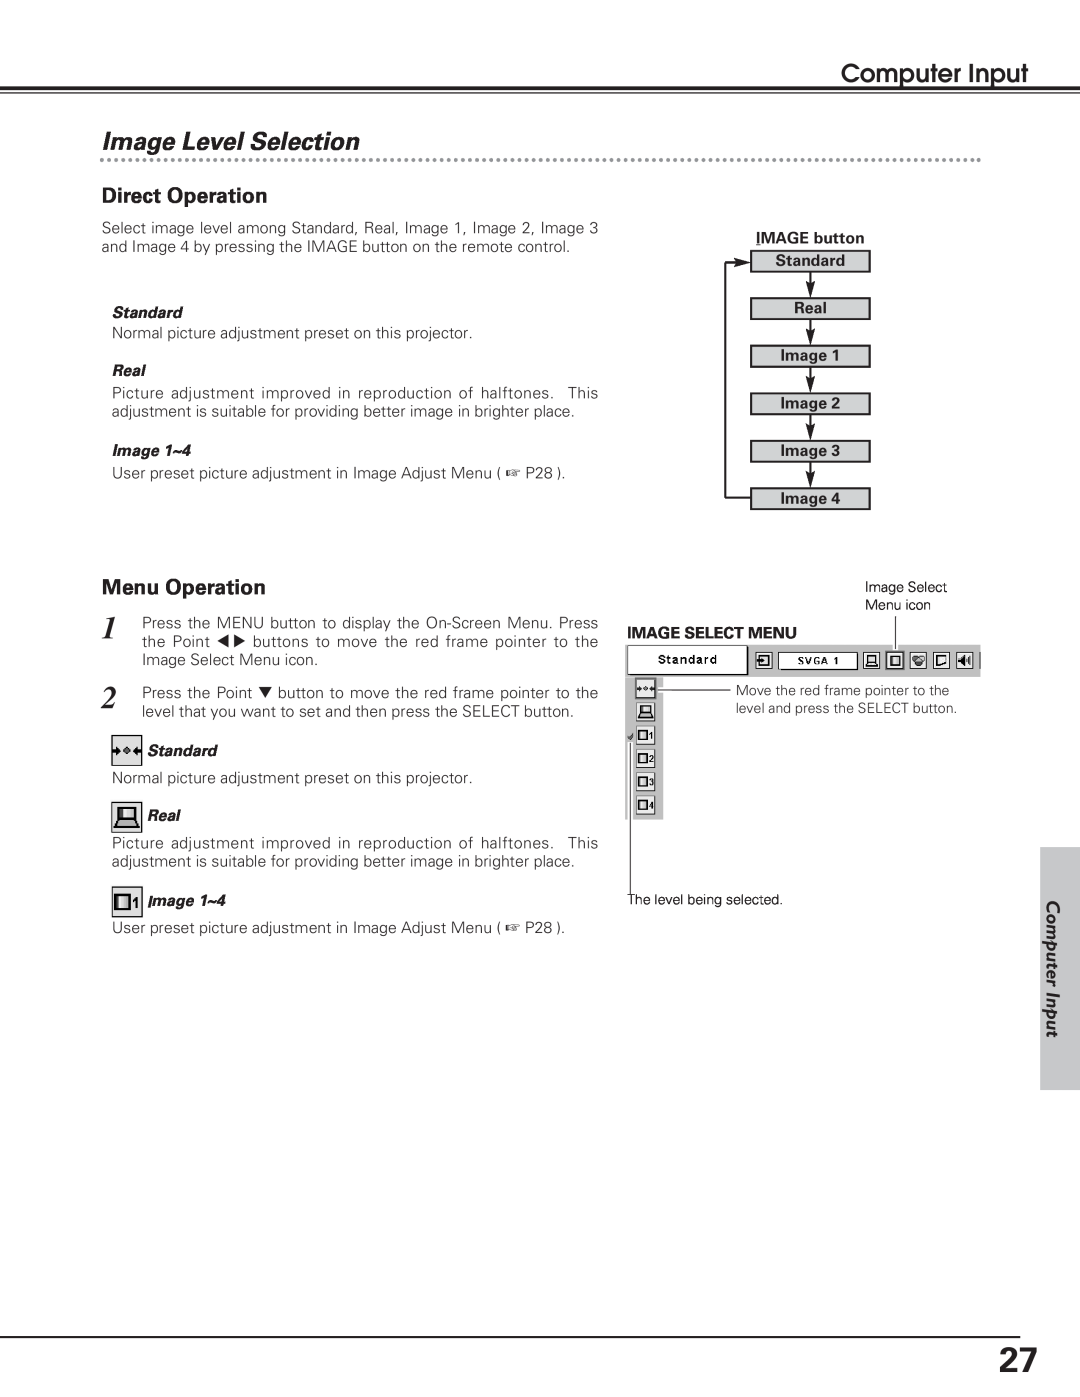 Eiki LC-SD12 owner manual Image Level Selection, Direct Operation, Menu Operation, Computer Input 